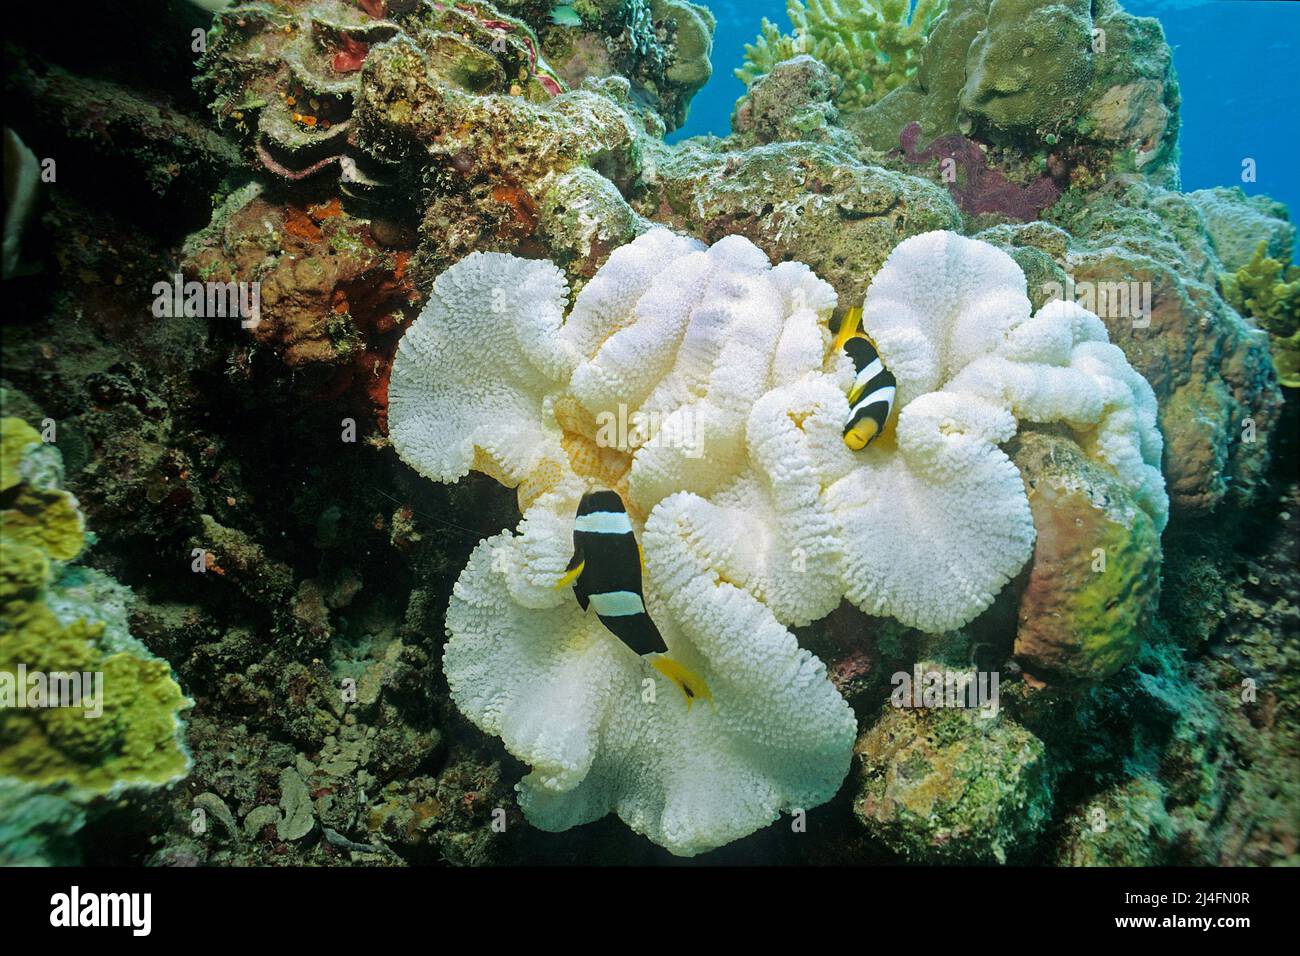 Sebae clownfish (Amphiprion sebae) in a bleached sea anemone (Stichodactyla haddoni), result of climate changing, Ari Atoll, Maldives, Indian ocean Stock Photo